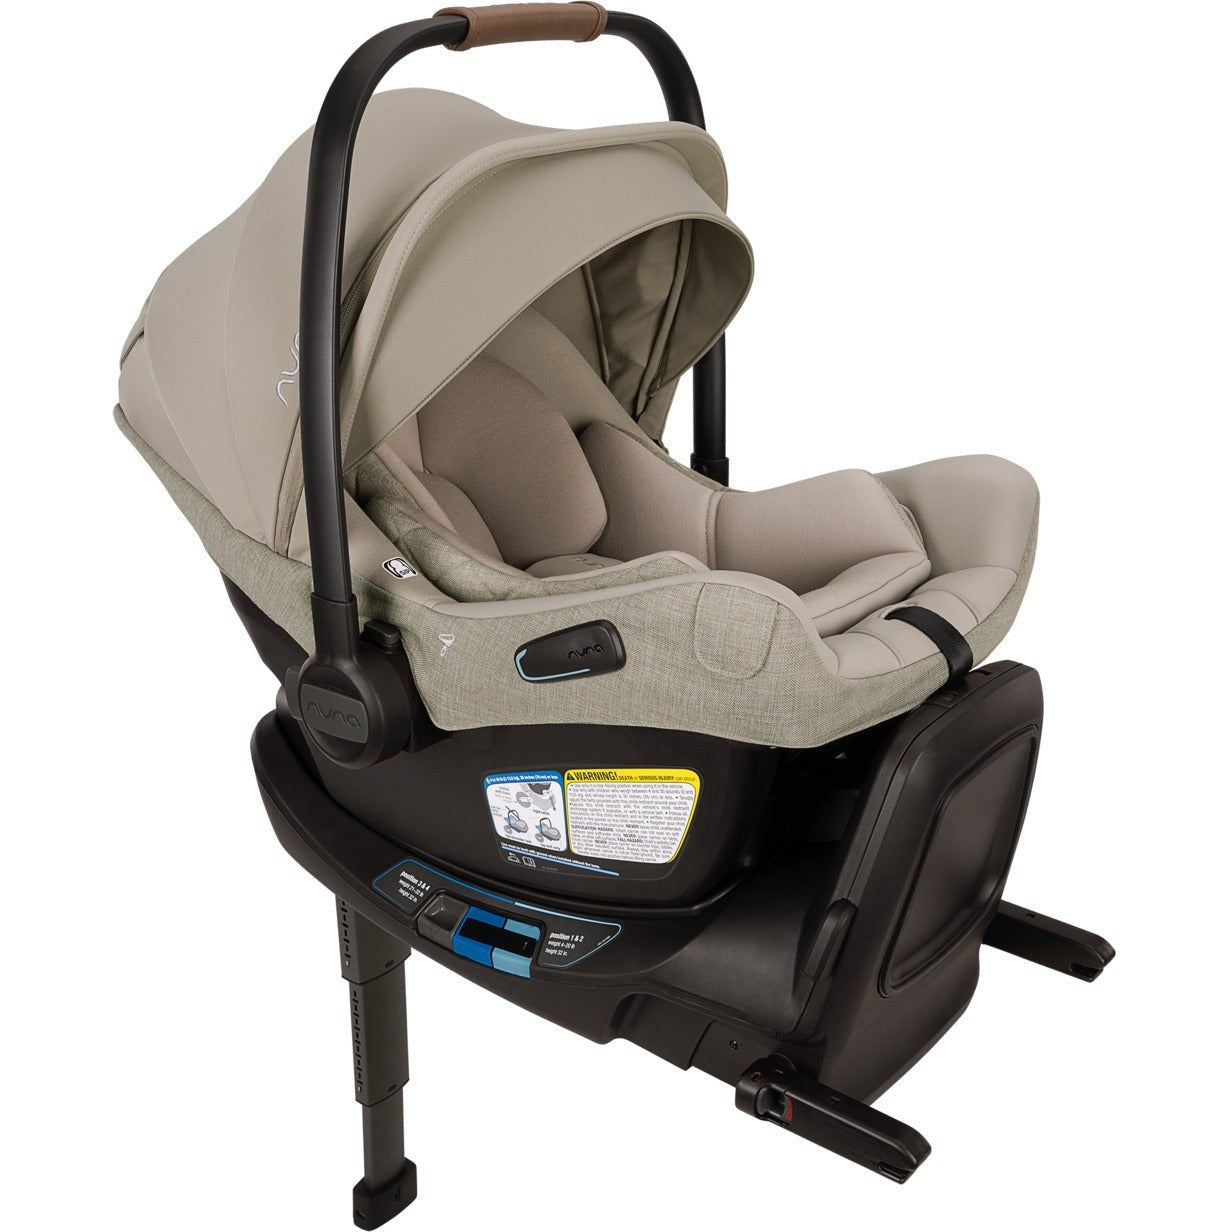 Buy hazelwood-late-april Nuna Pipa Aire RX Infant Car Seat + RELX Base